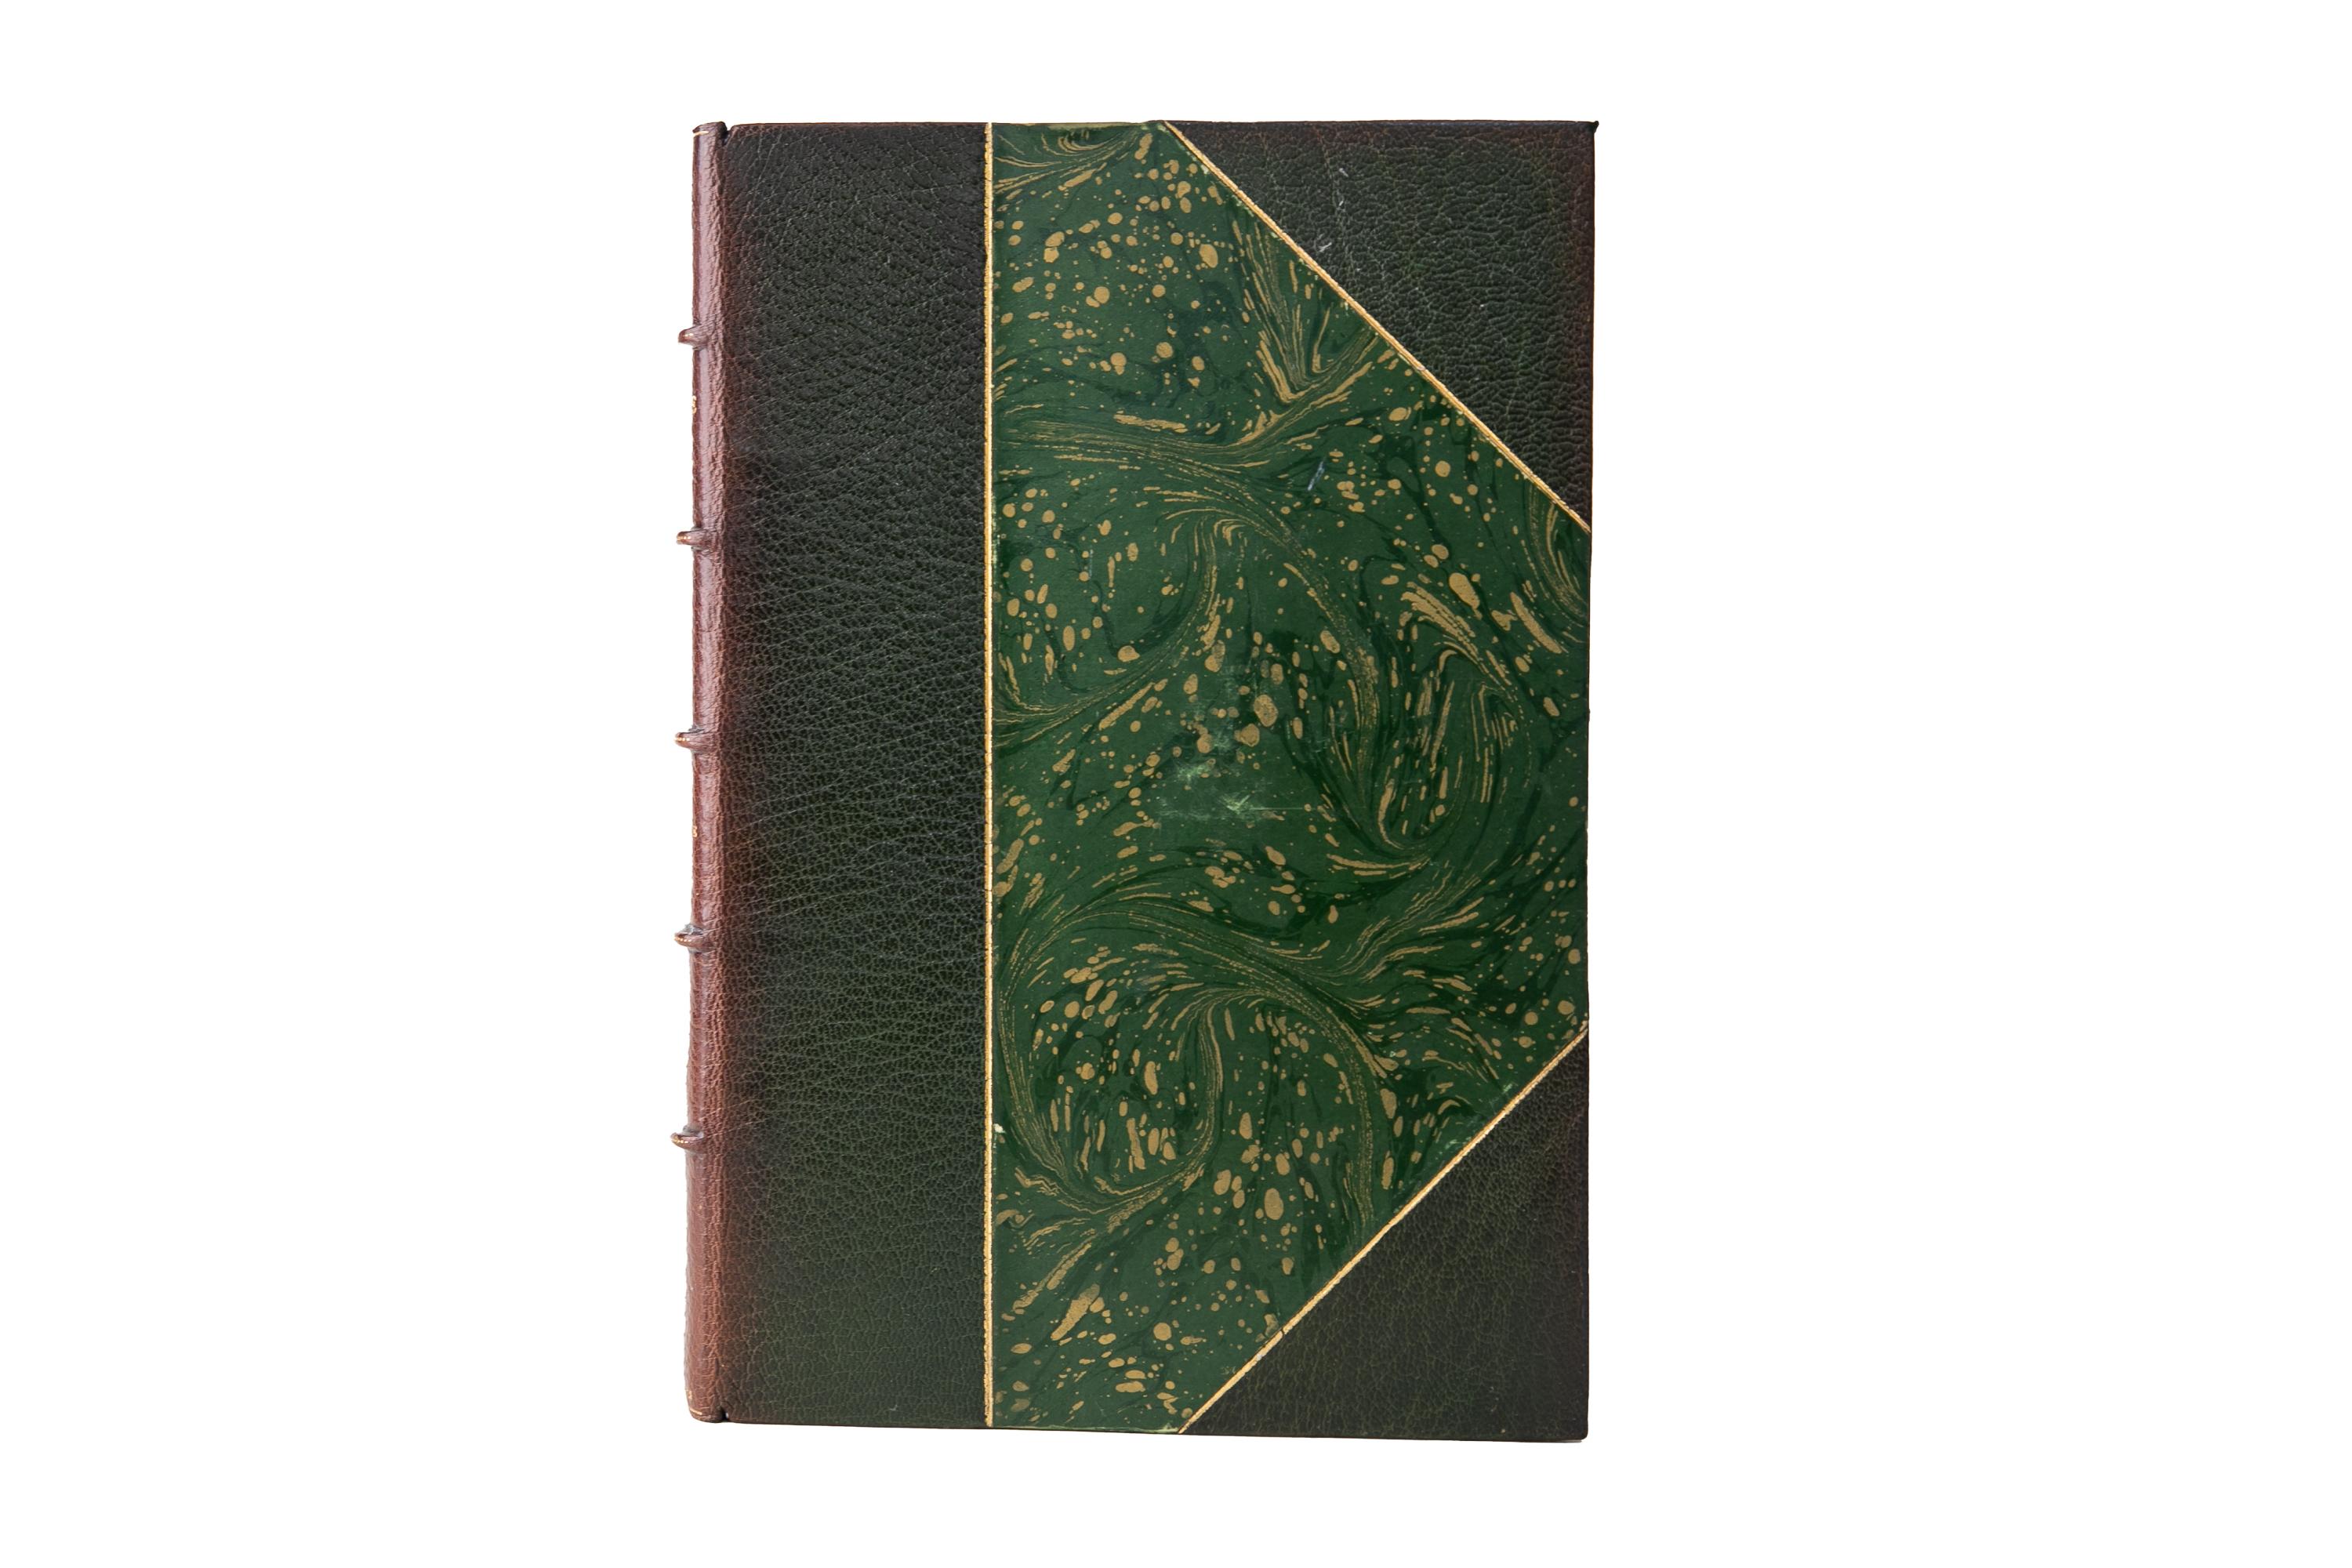 47 Volumes. Alexandre Dumas, The Complete Works. Edition de Médicis. Bound in 3/4 green morocco and marbled boards with the raised band spines decorated in gilt-tooling and faded to brown. The top edges are gilt with marbled endpapers. Illustrated